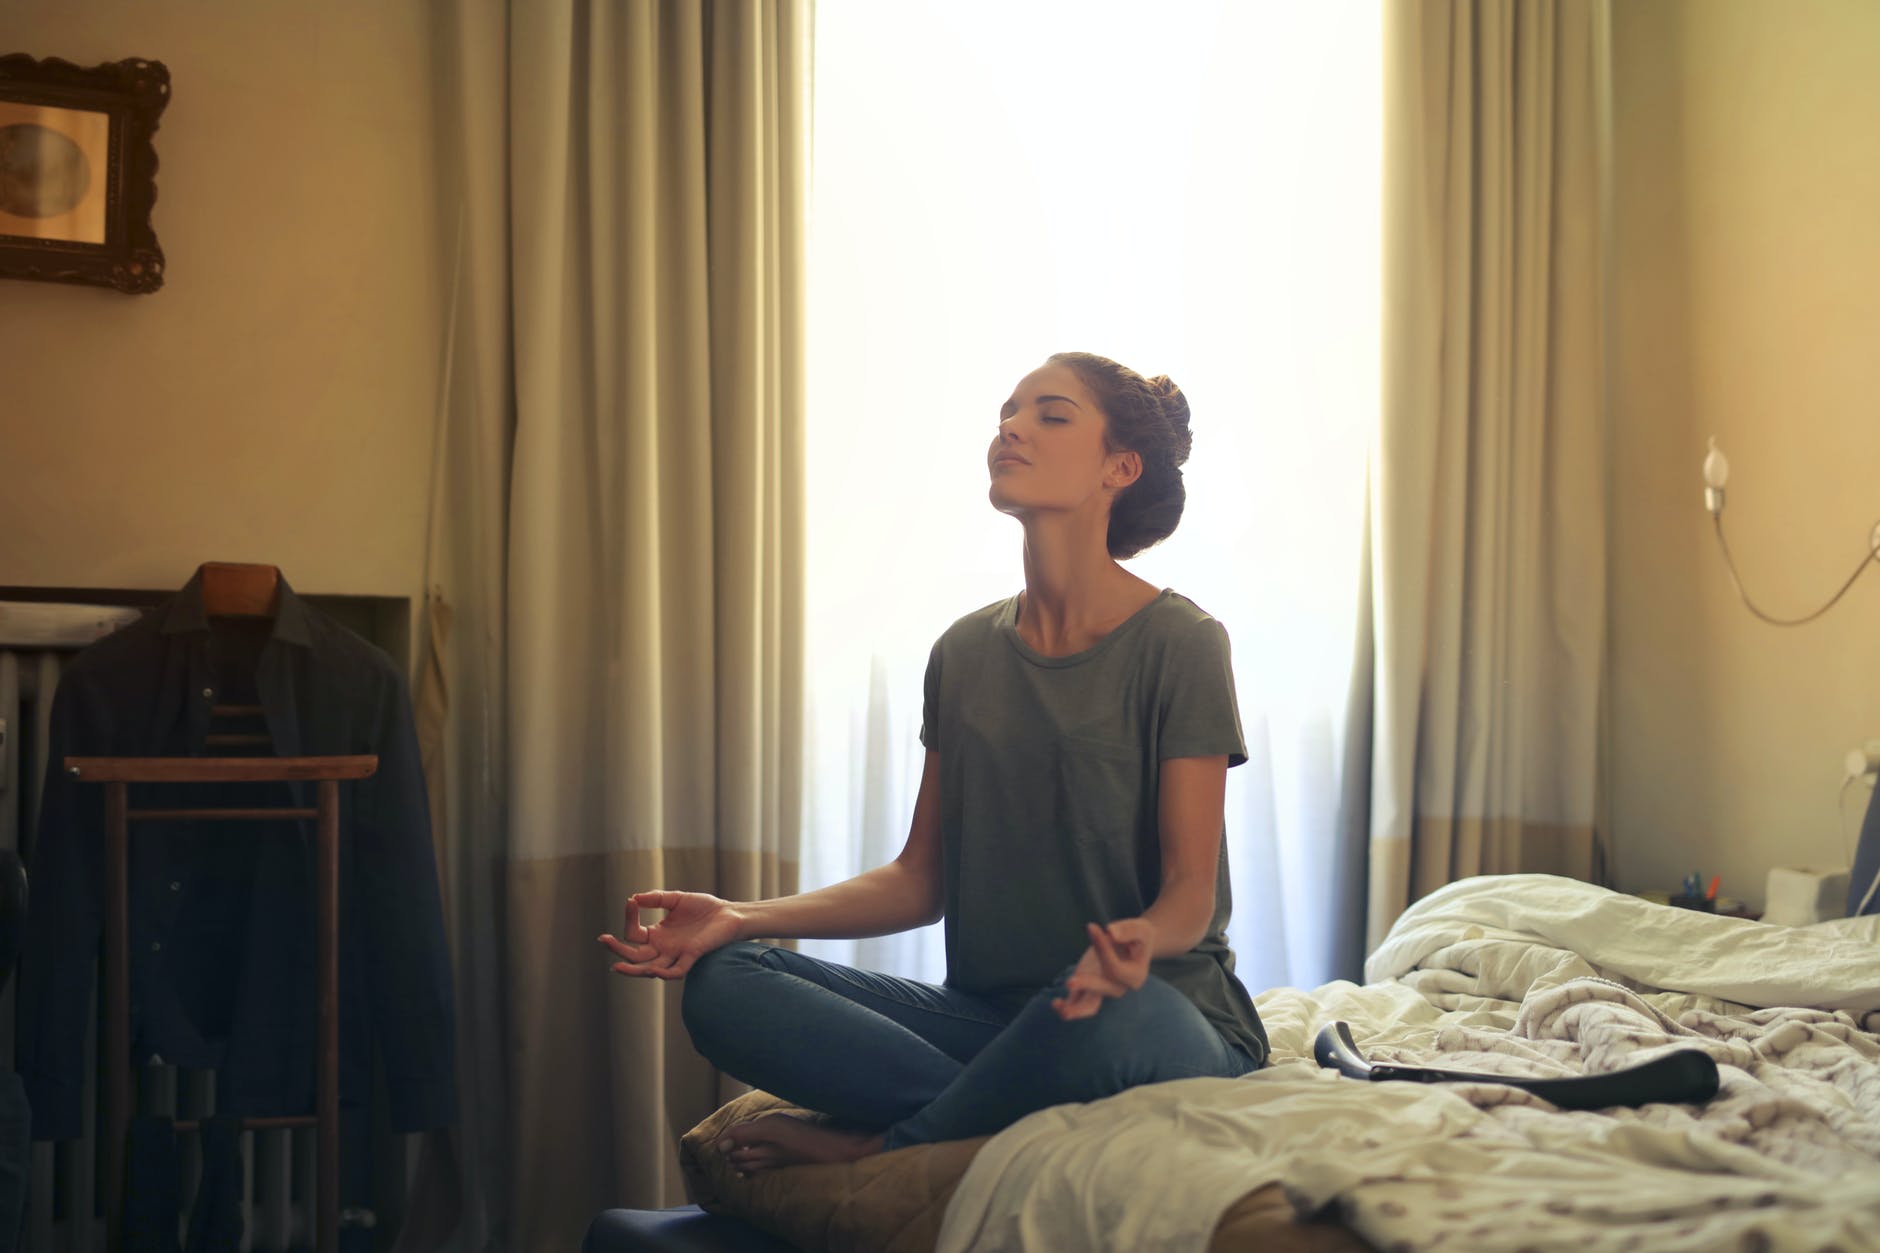 Young woman meditates about her goals alone in her bedroom.